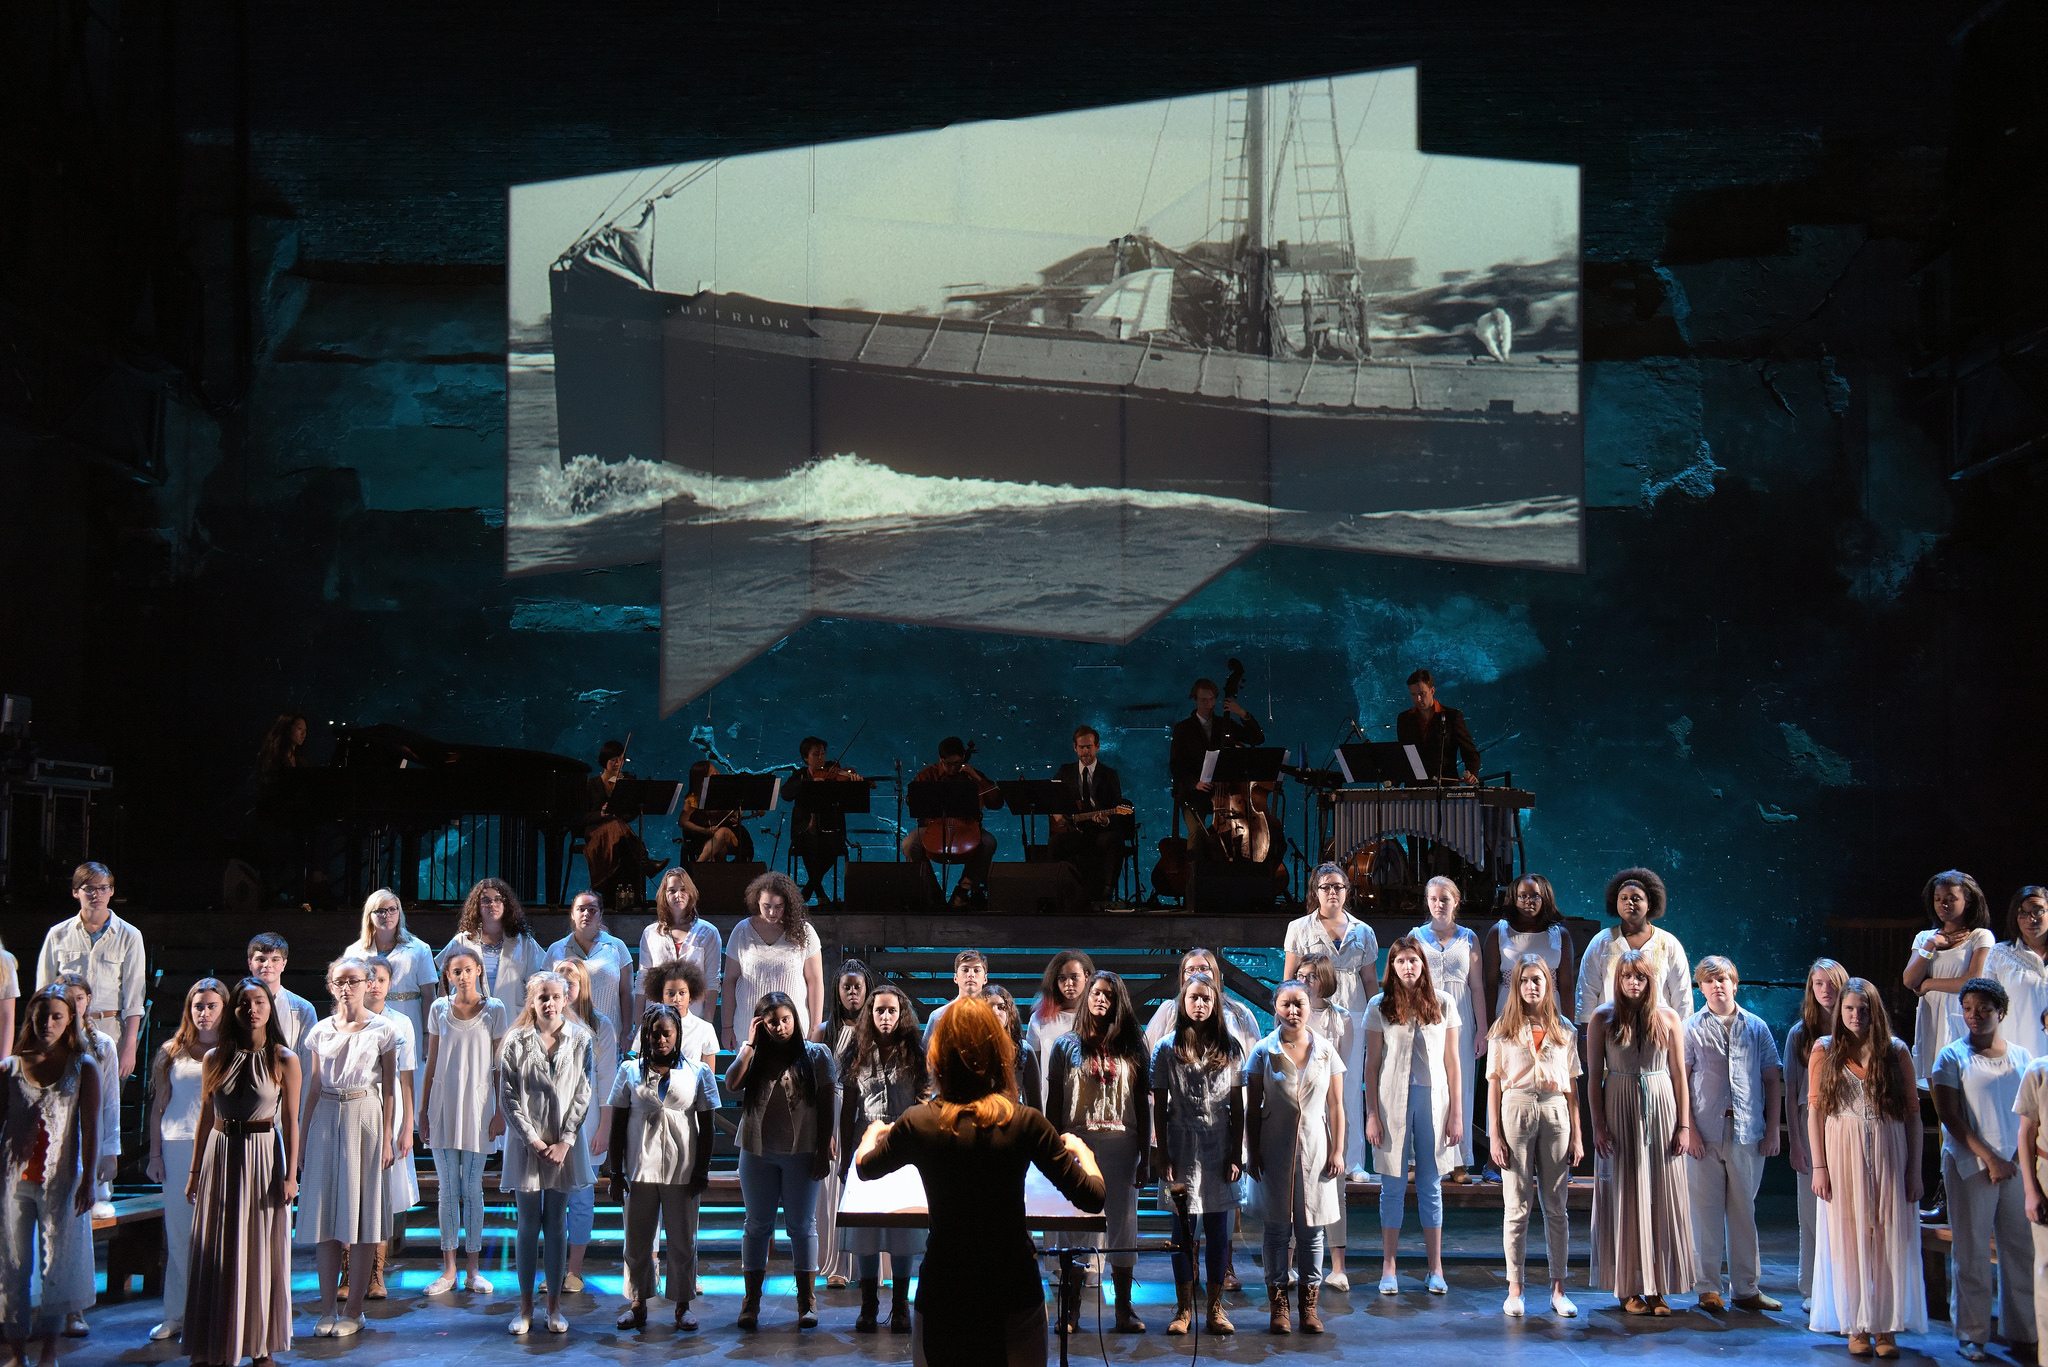 youth choir on stage with musicians and ship backdrop